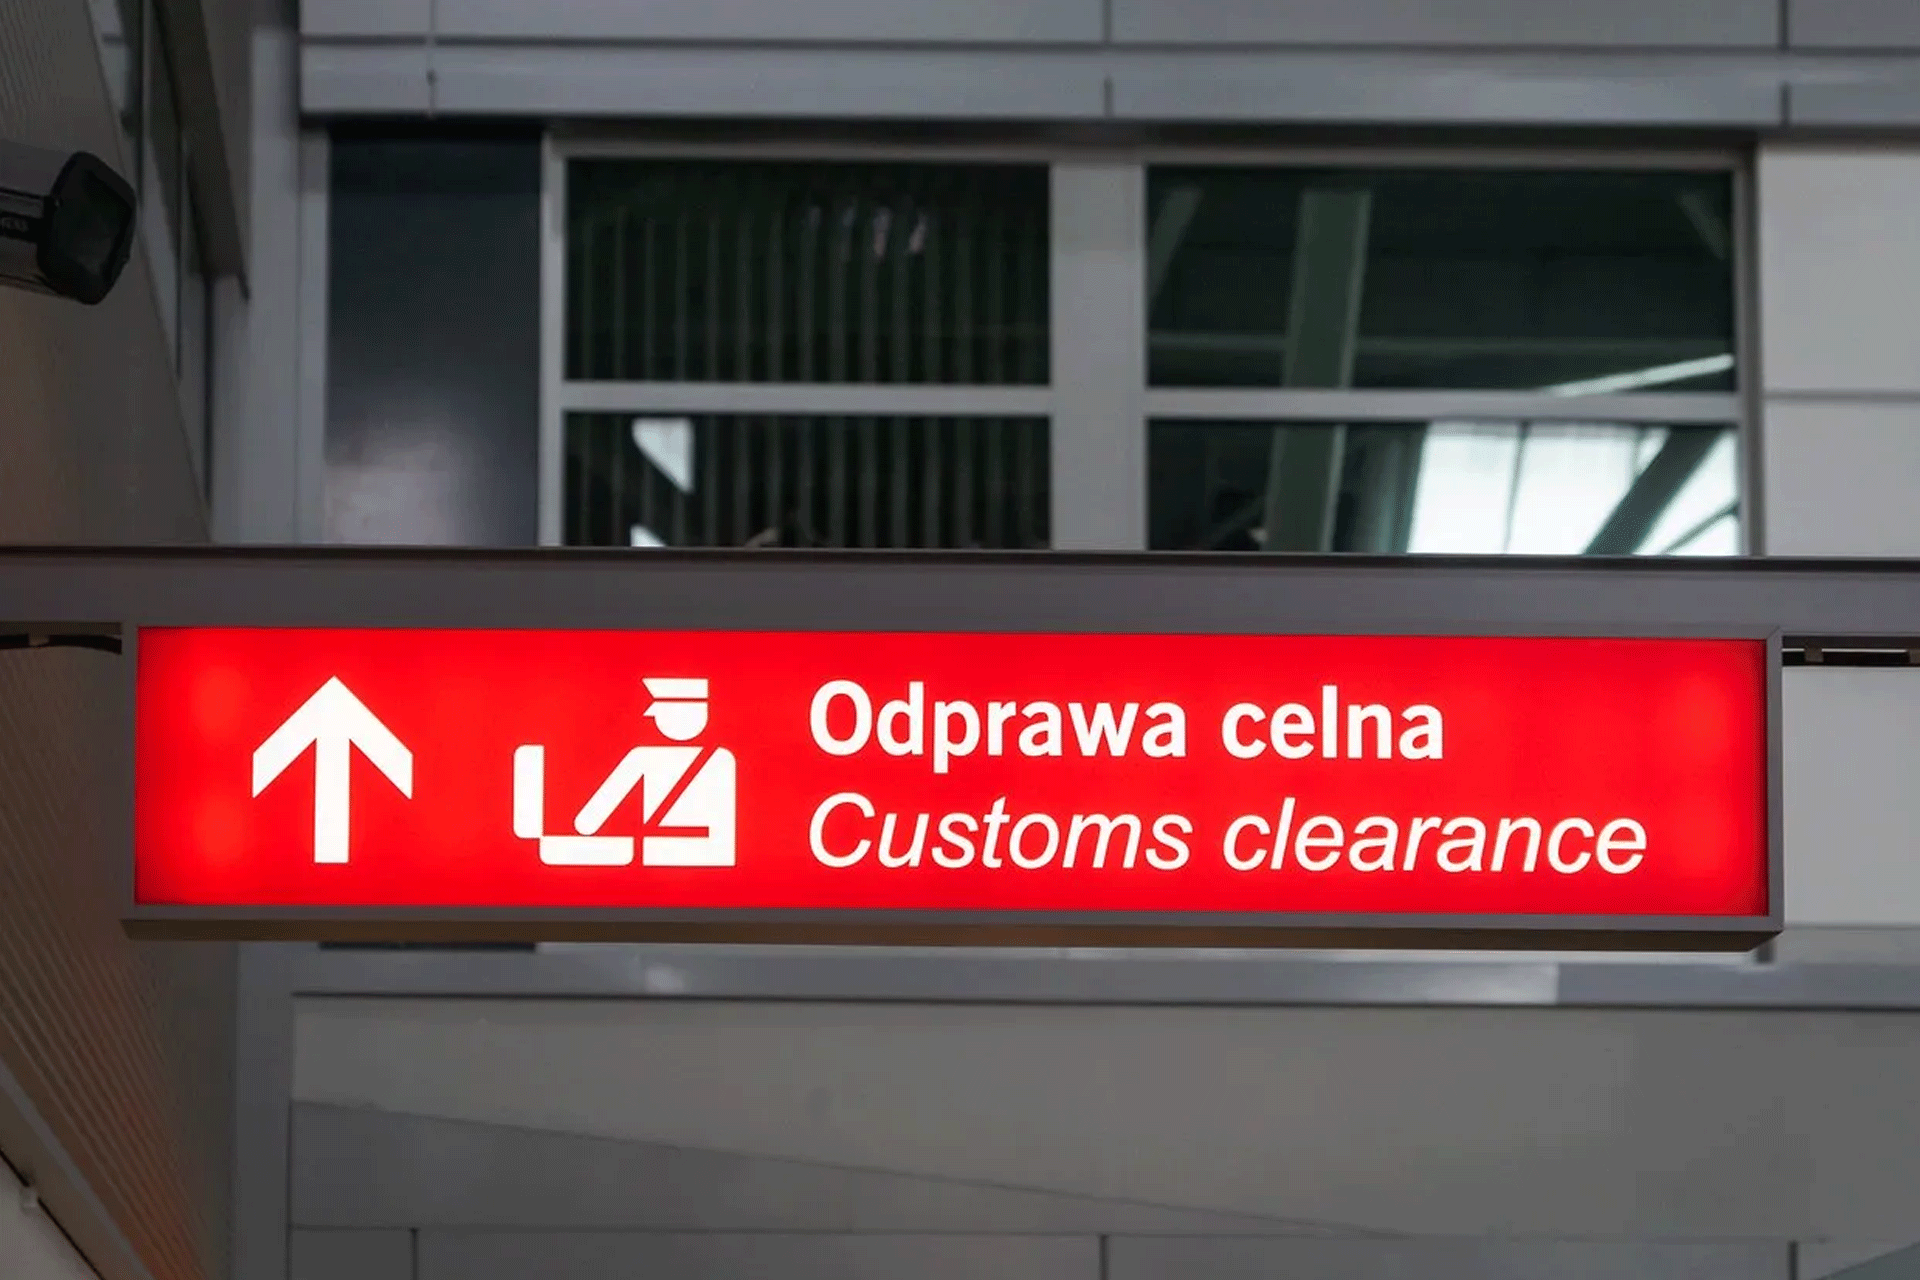 An image of a customs clearance sign with English and Polish languages